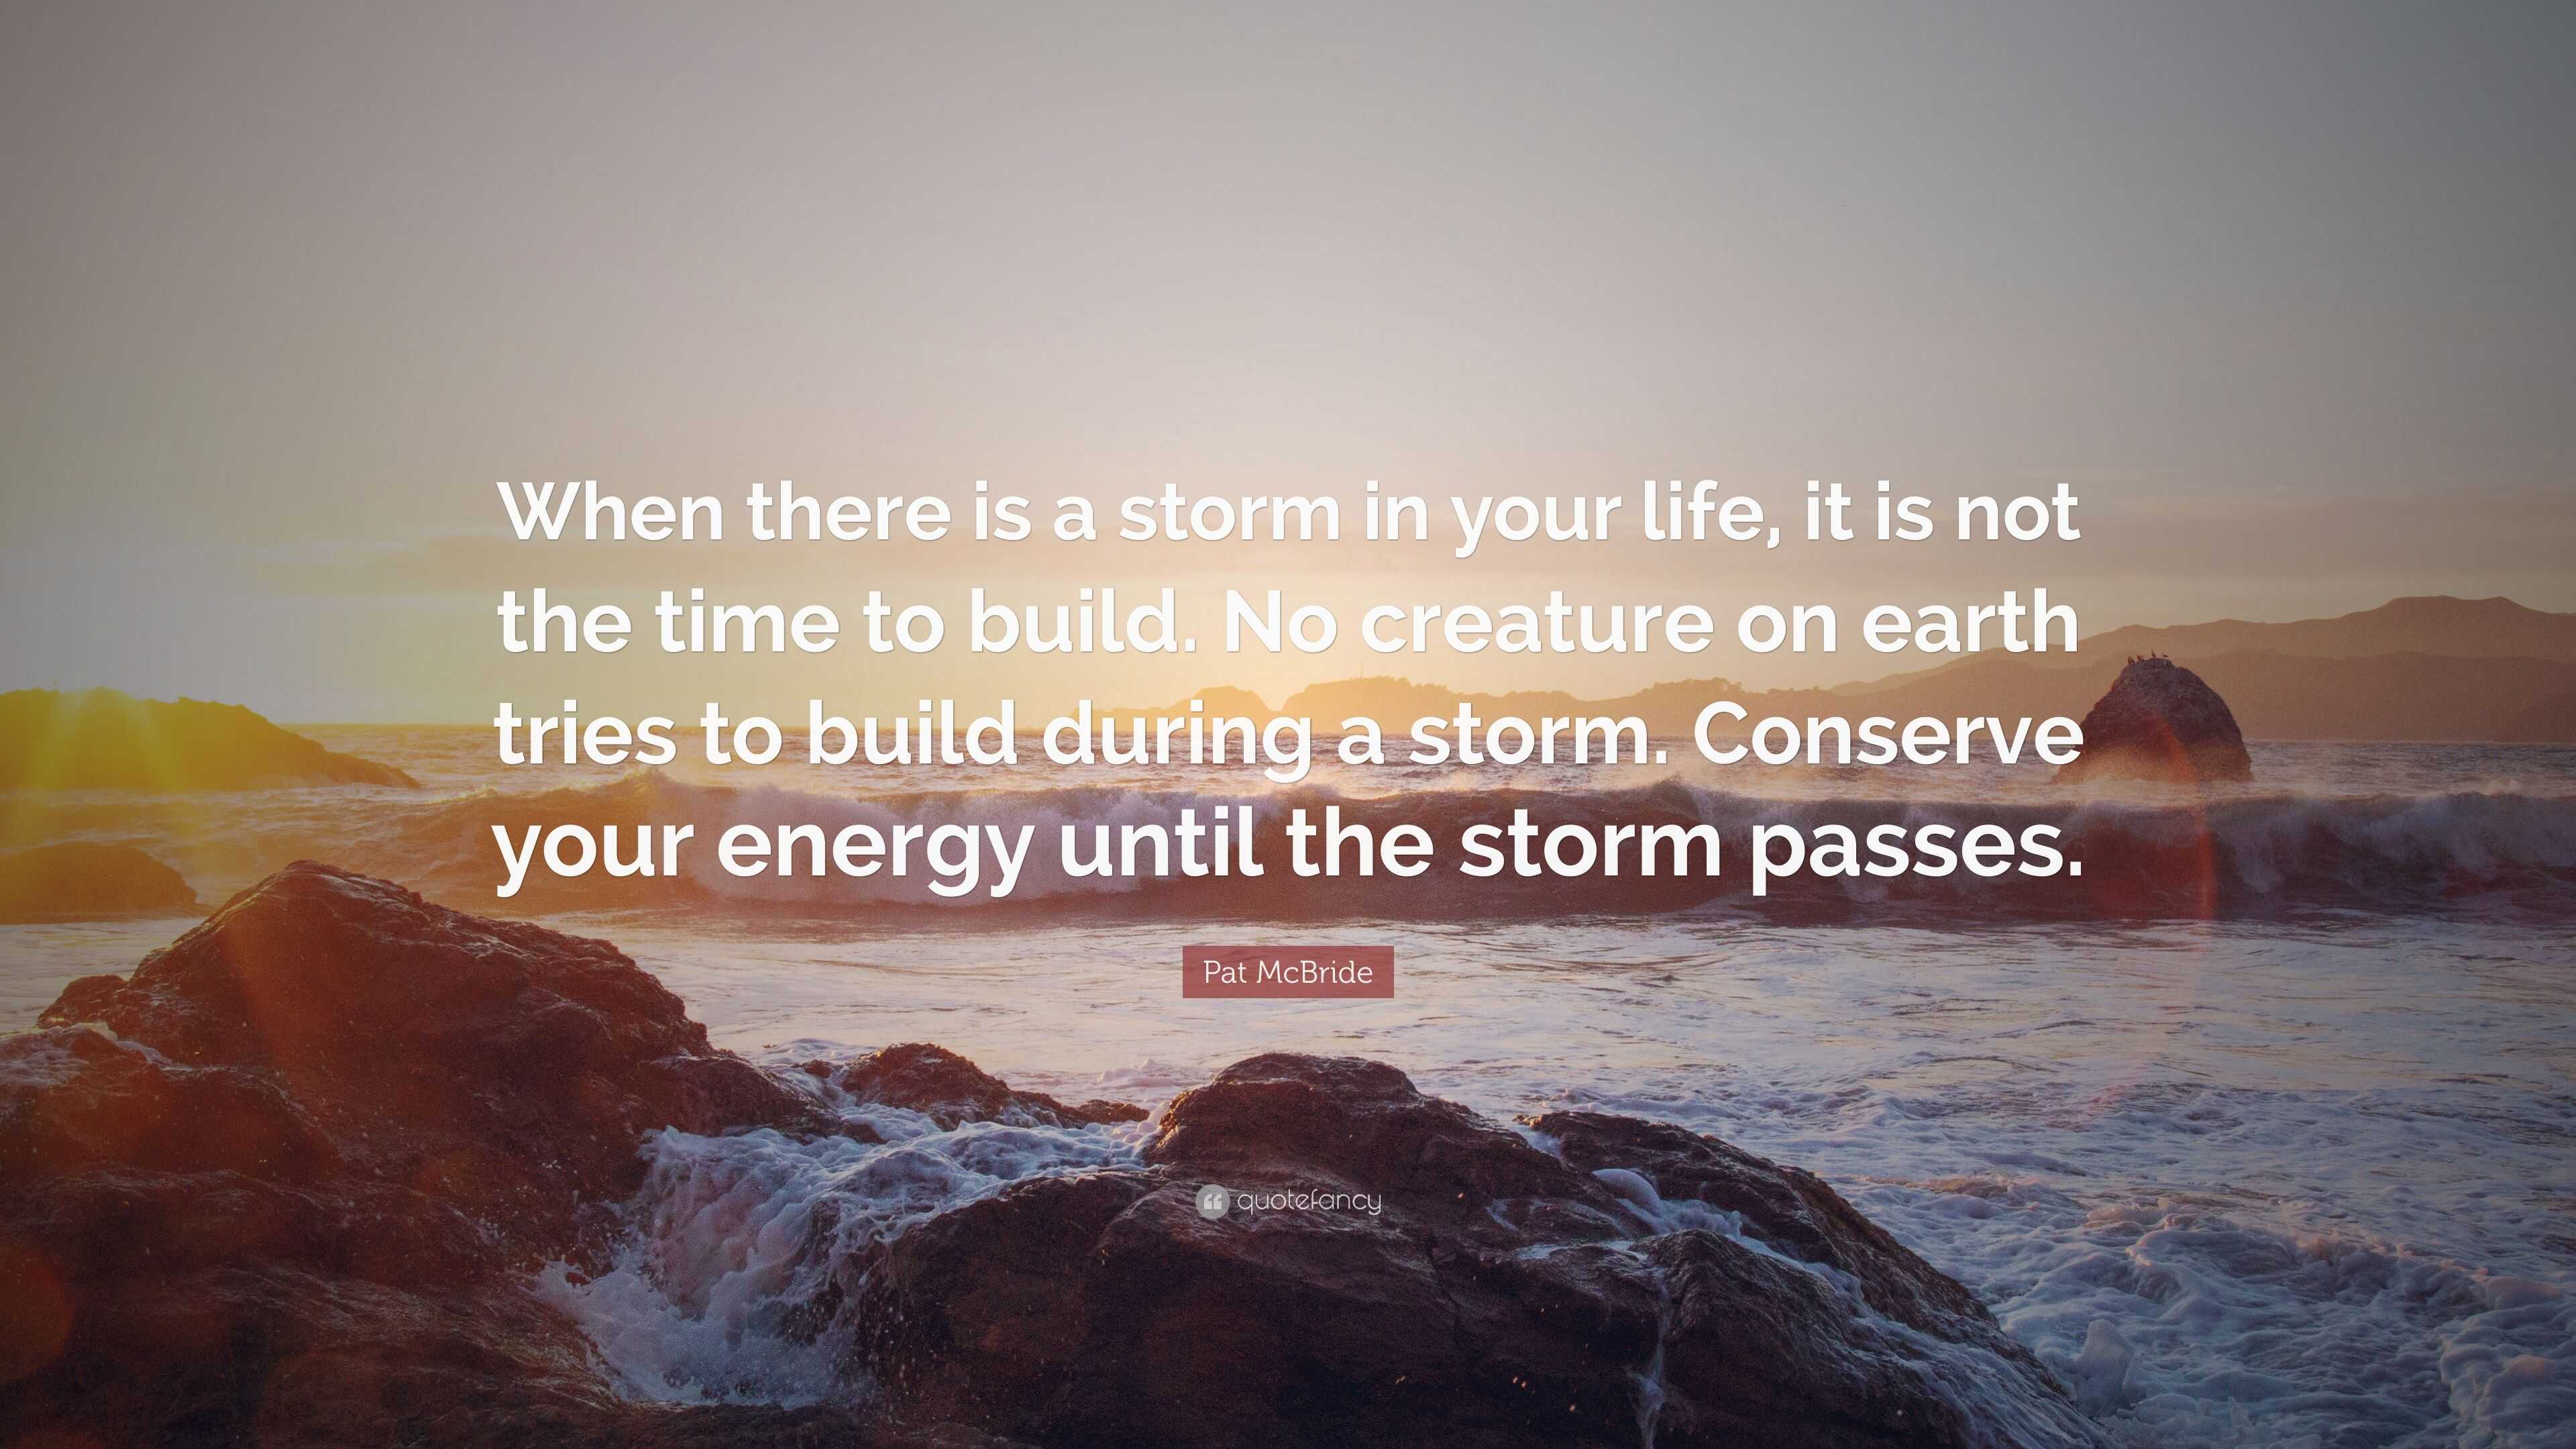 Through the Storms: A manual for when life hurts